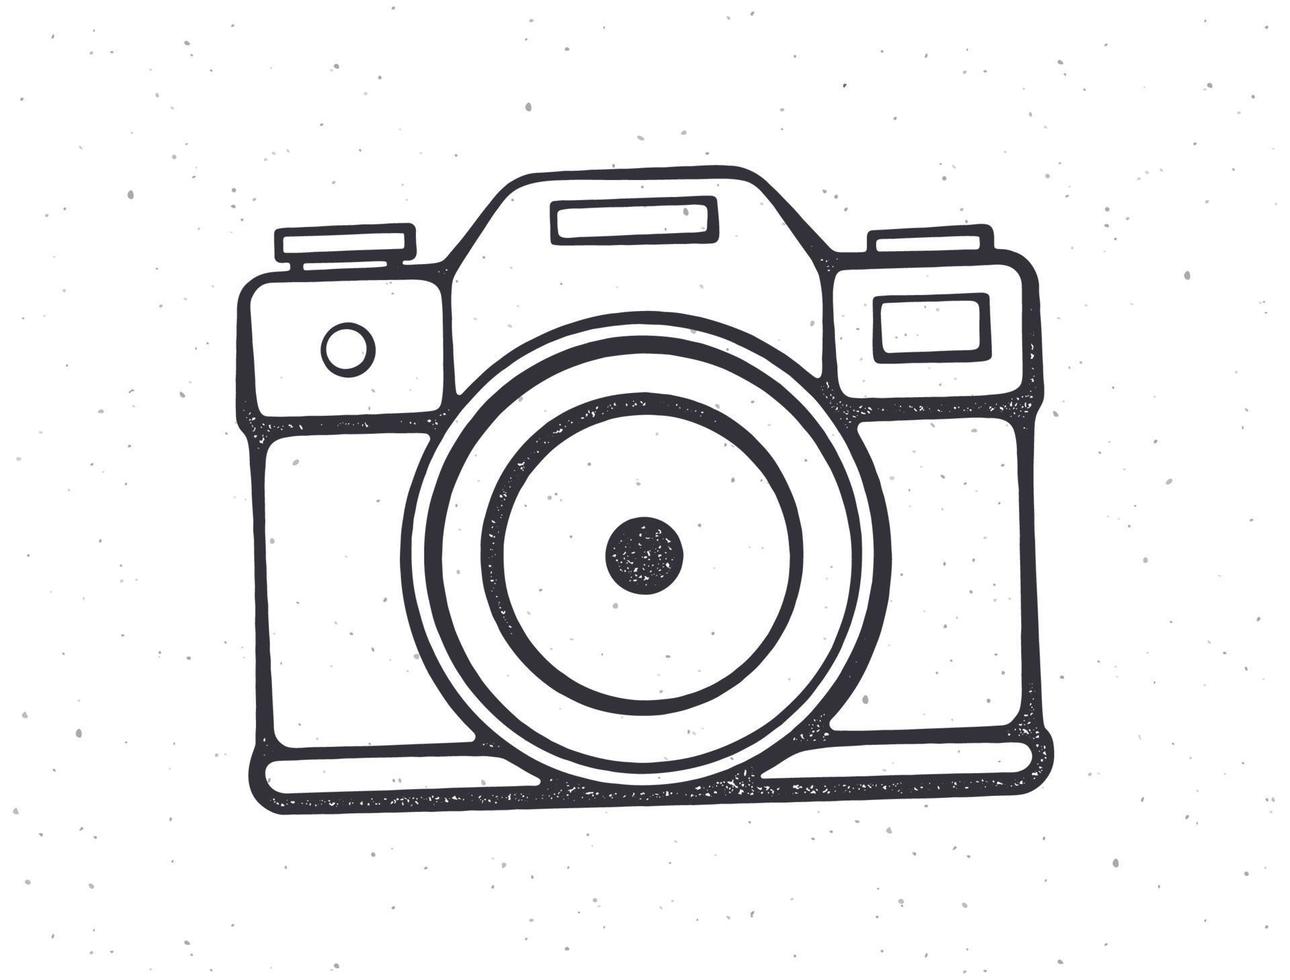 Drawing Sketch Style Illustration Of A Dslr Digital Still Image Camera With  Zoom Lens Viewed From Side On Isolated White Background In Black And White  Royalty Free SVG Cliparts Vectors And Stock